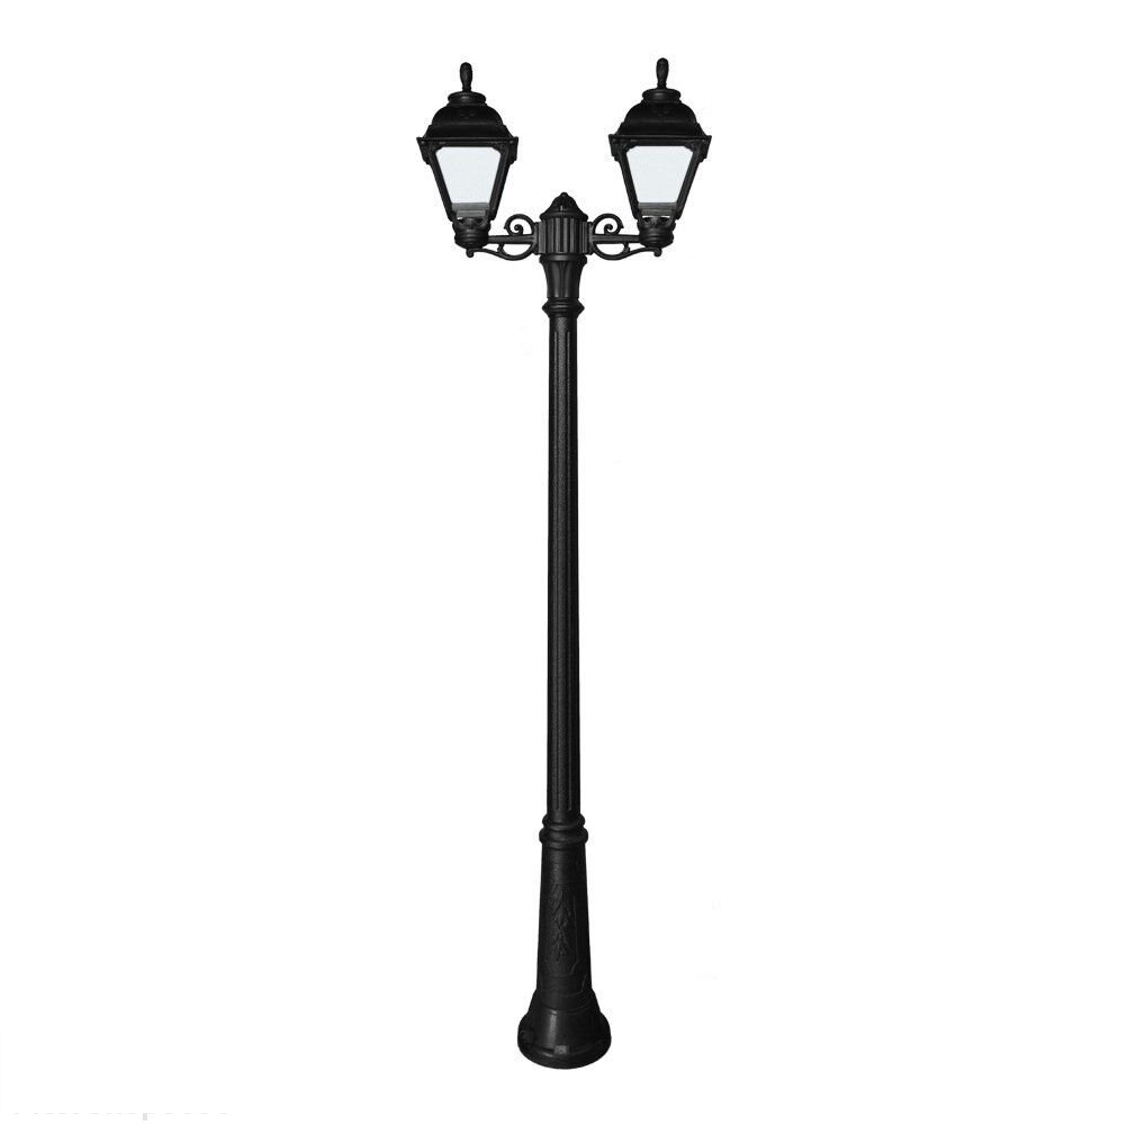 FUMAGALLI - RICU BISSO/CEFA 2L Outdoor Post Light with Opal Diffuser (Black)